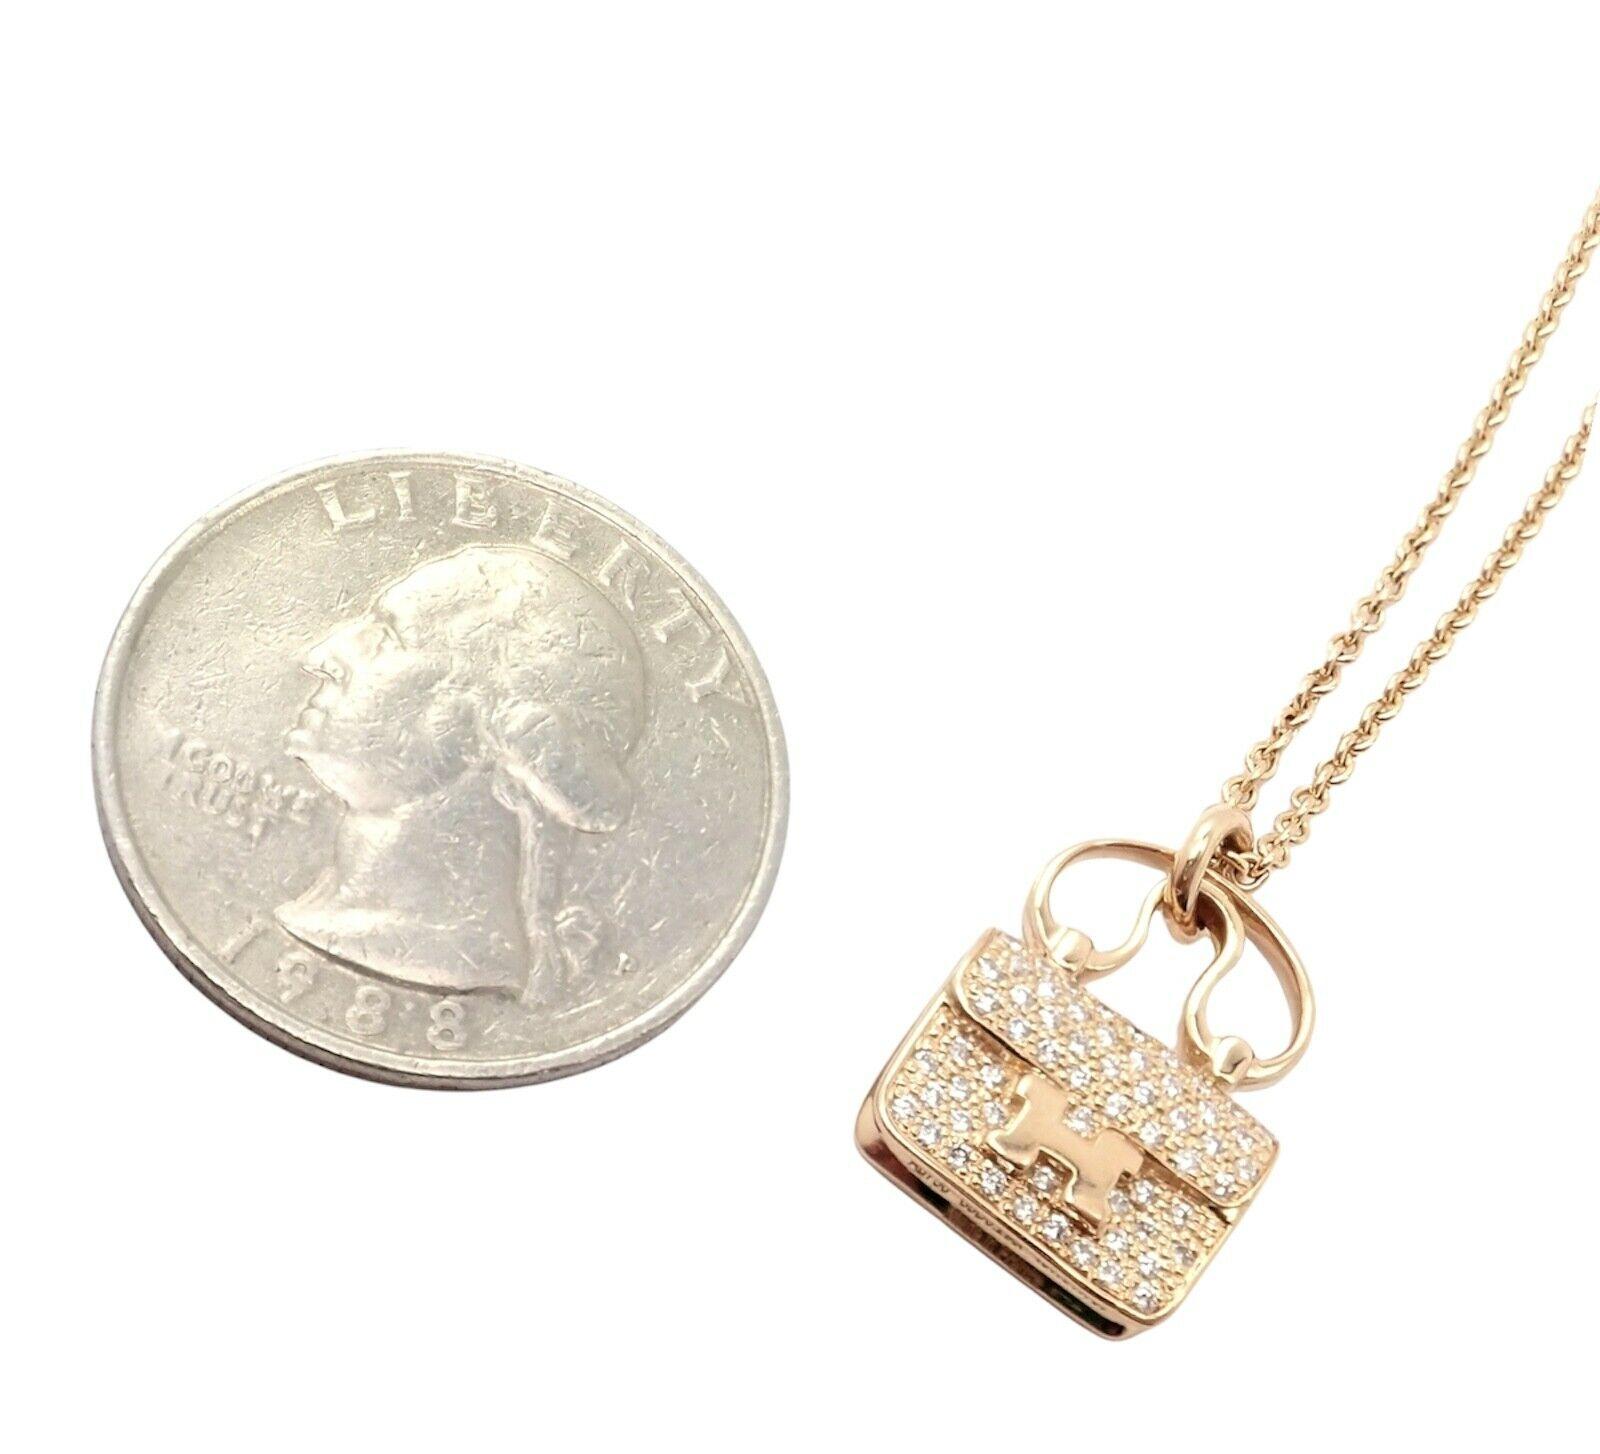 Hermes Diamond Constance Amulette Rose Gold Pendant Necklace In Excellent Condition For Sale In Holland, PA